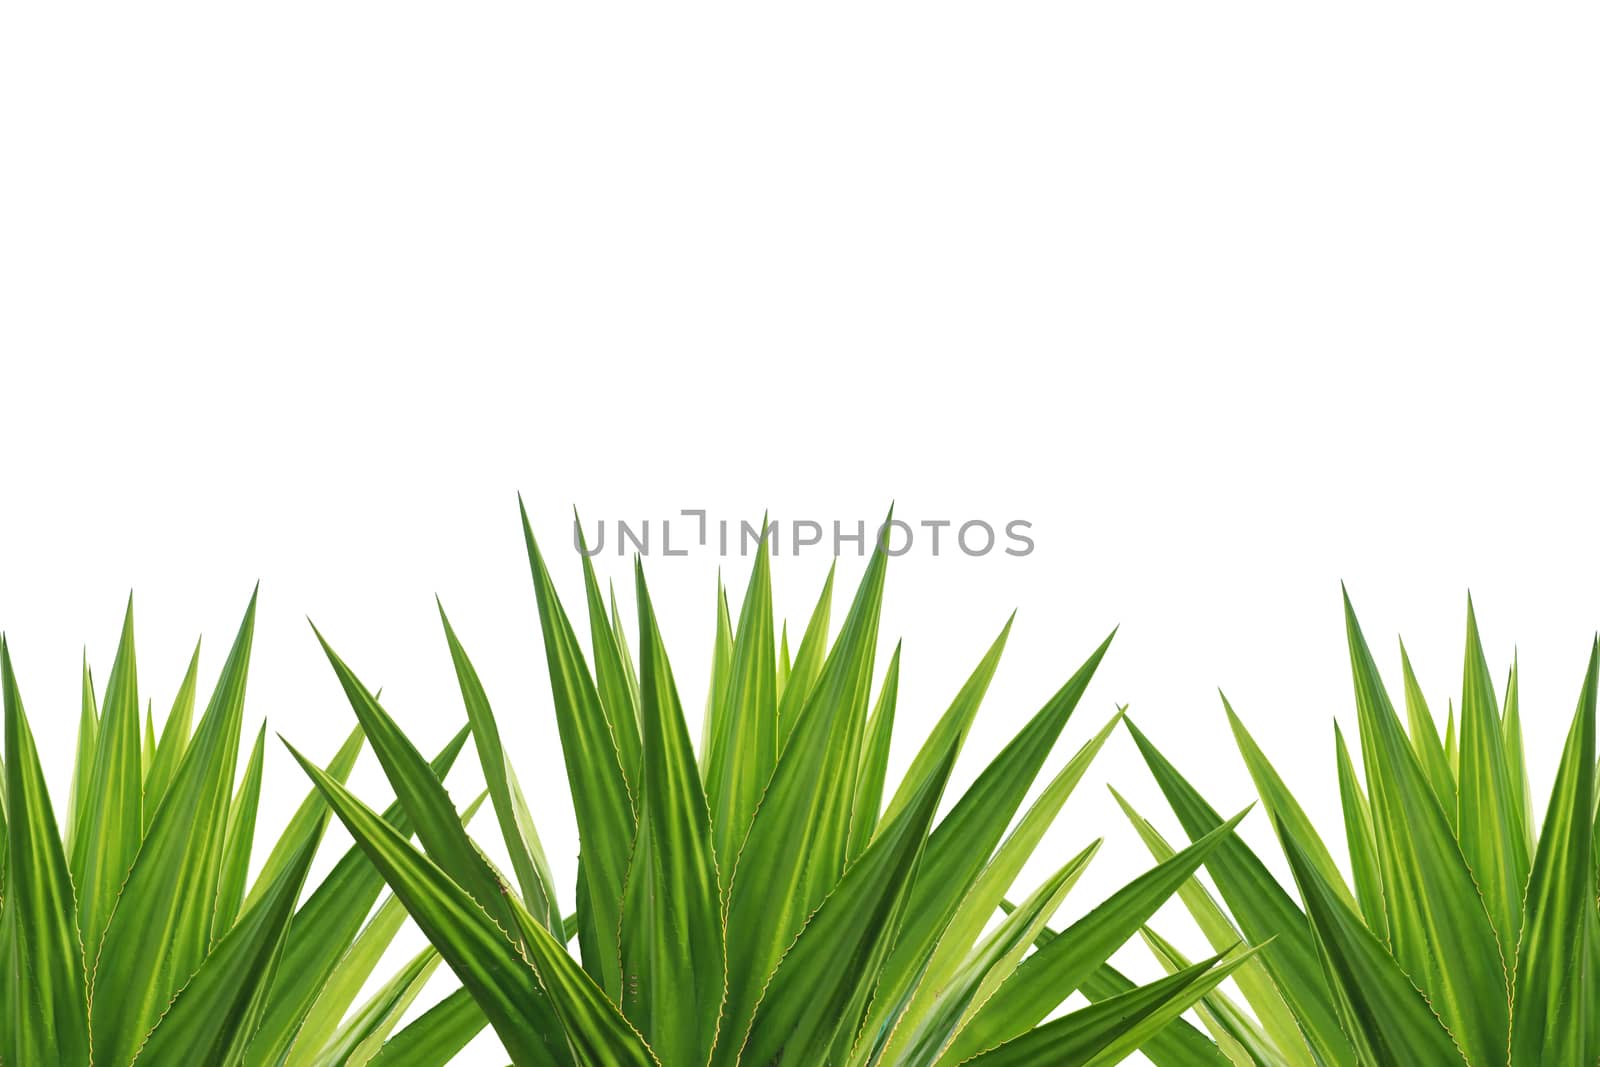 Agave plant isolated on white background